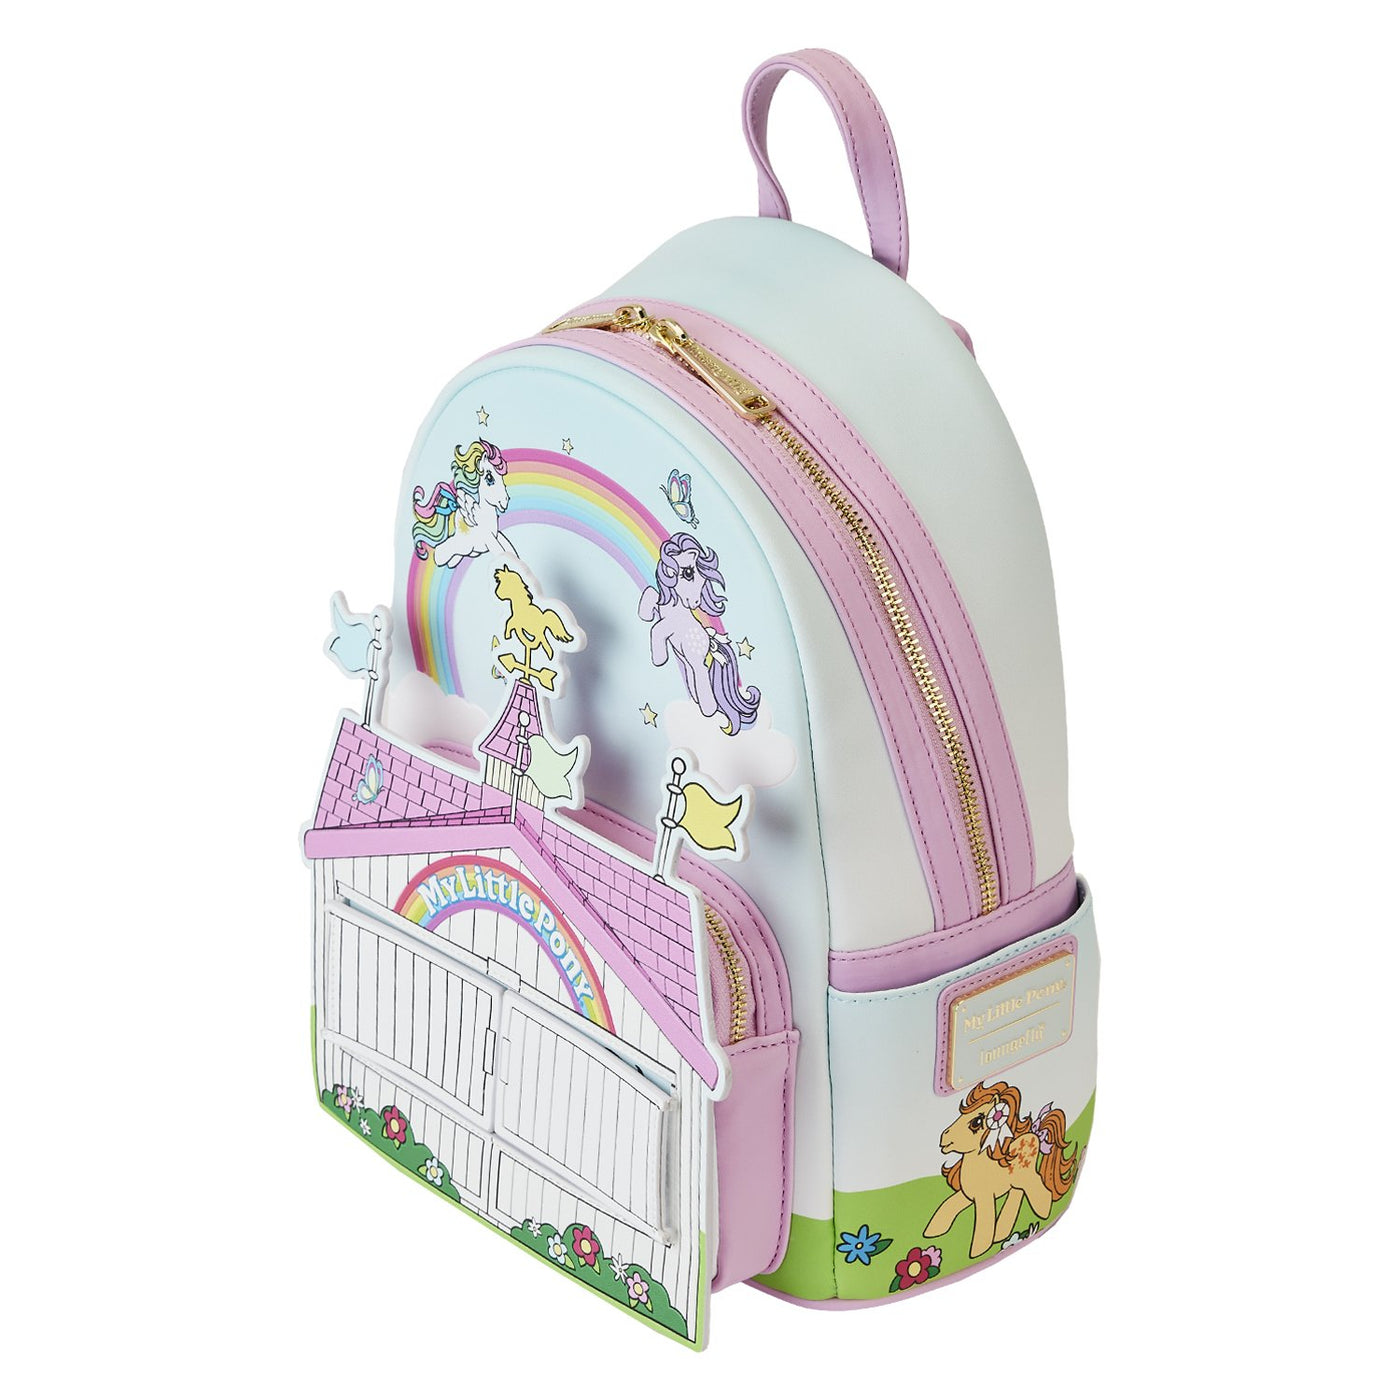 671803456013 - Loungefly Hasbro My Little Pony 40th Anniversary Stable Mini Backpack - Top View